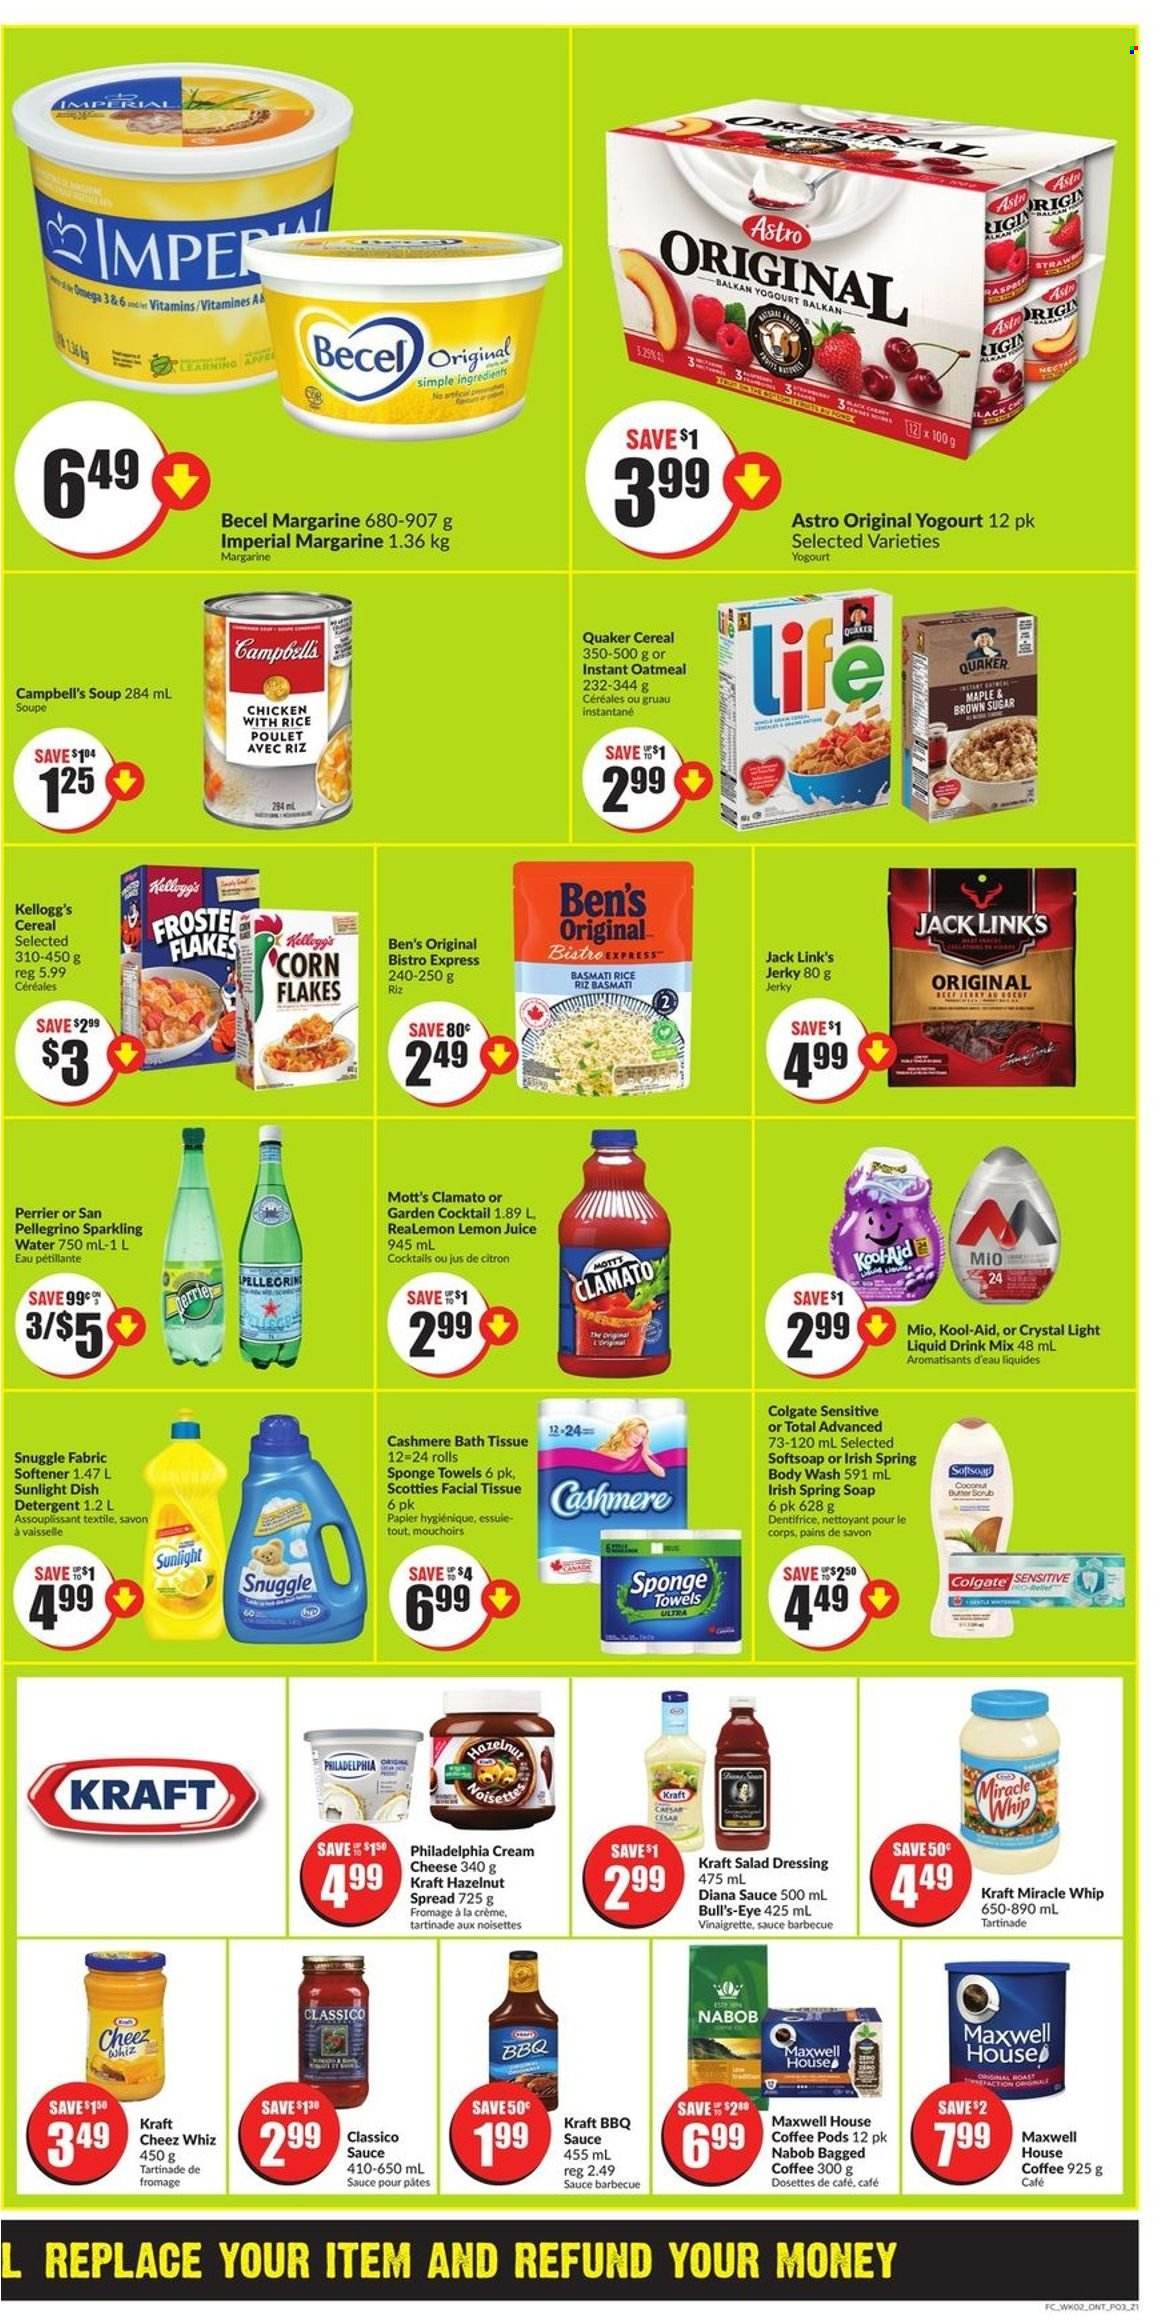 thumbnail - Chalo! FreshCo. Flyer - May 12, 2022 - May 18, 2022 - Sales products - coconut, Mott's, Campbell's, soup, Quaker, Kraft®, jerky, cream cheese, margarine, Miracle Whip, Kellogg's, Jack Link's, oatmeal, cereals, corn flakes, basmati rice, BBQ sauce, salad dressing, vinaigrette dressing, dressing, Classico, hazelnut spread, Clamato, Perrier, sparkling water, San Pellegrino, lemon juice, Maxwell House, coffee pods, bagged coffee, Omega-3, detergent, Colgate, Philadelphia. Page 3.